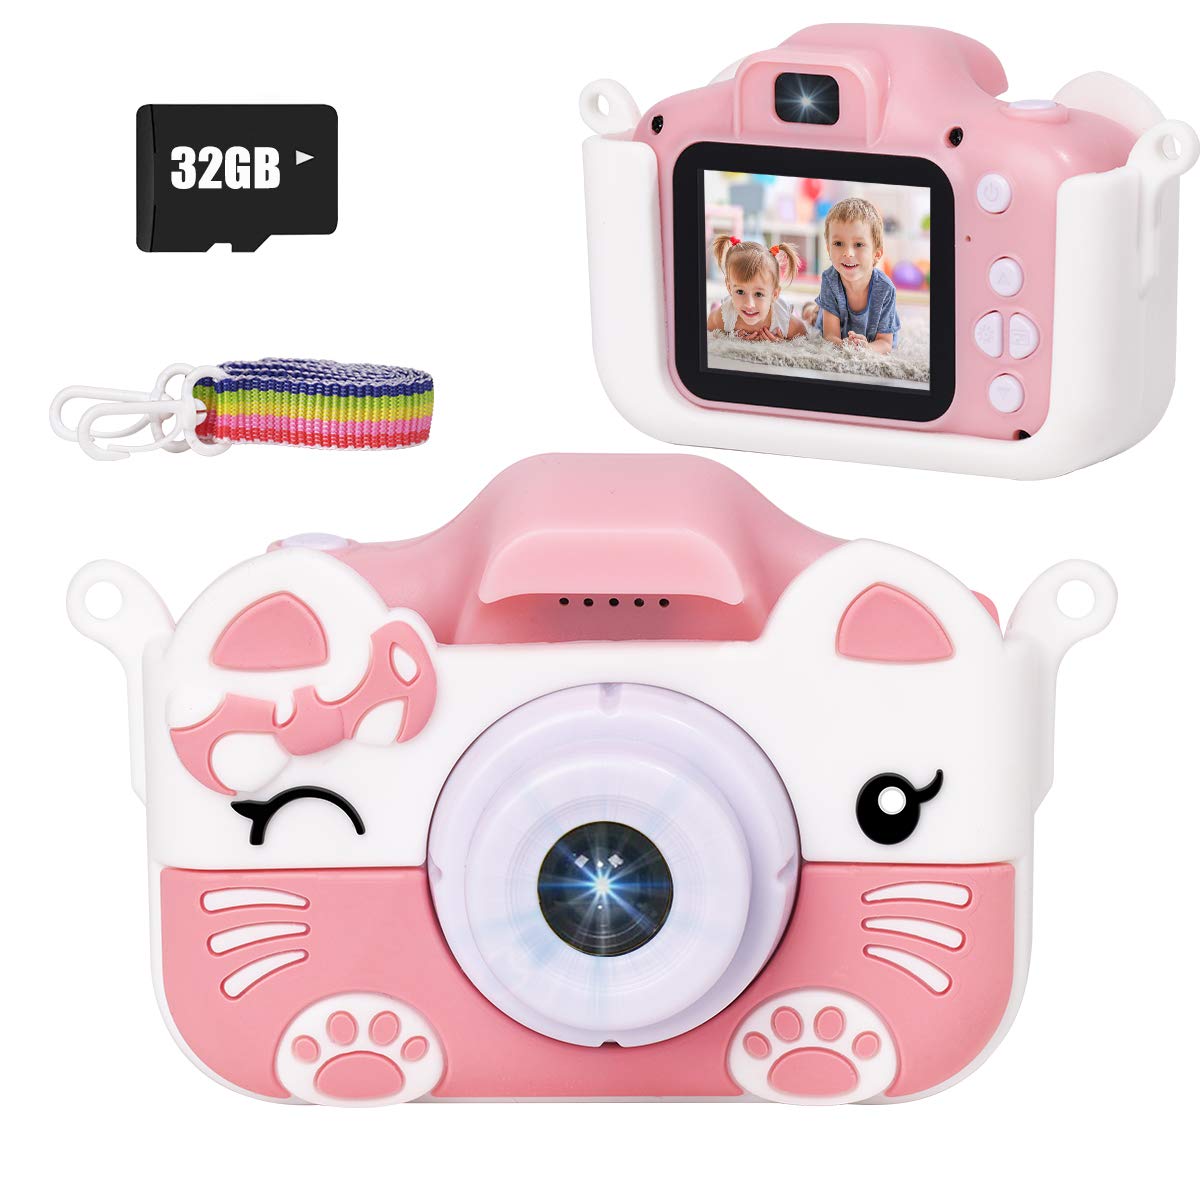 JLtech Kids Selfie Digital Camera，Birthday Toy Gift for Girls Age 2-10 , Children Cameras for Toddler with 1080P Video，Portable and Rechargeable Toy Camera for Girls with 32GB SD Card (Pink)